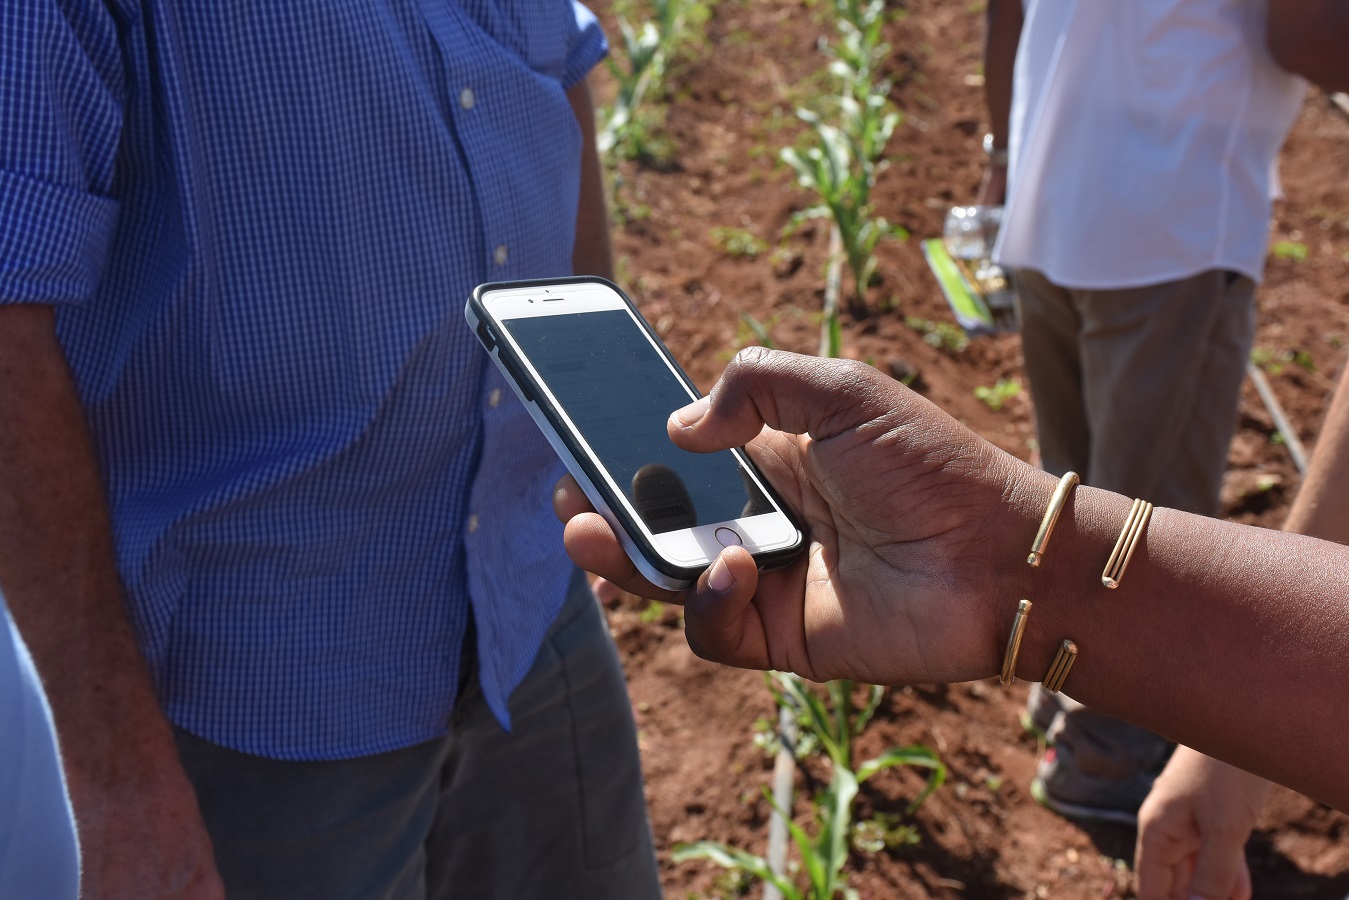 The TAMASA team plans to publish the code and user-friendly interface of this new geospatial assessment tool later this year. (Photo: CIMMYT)